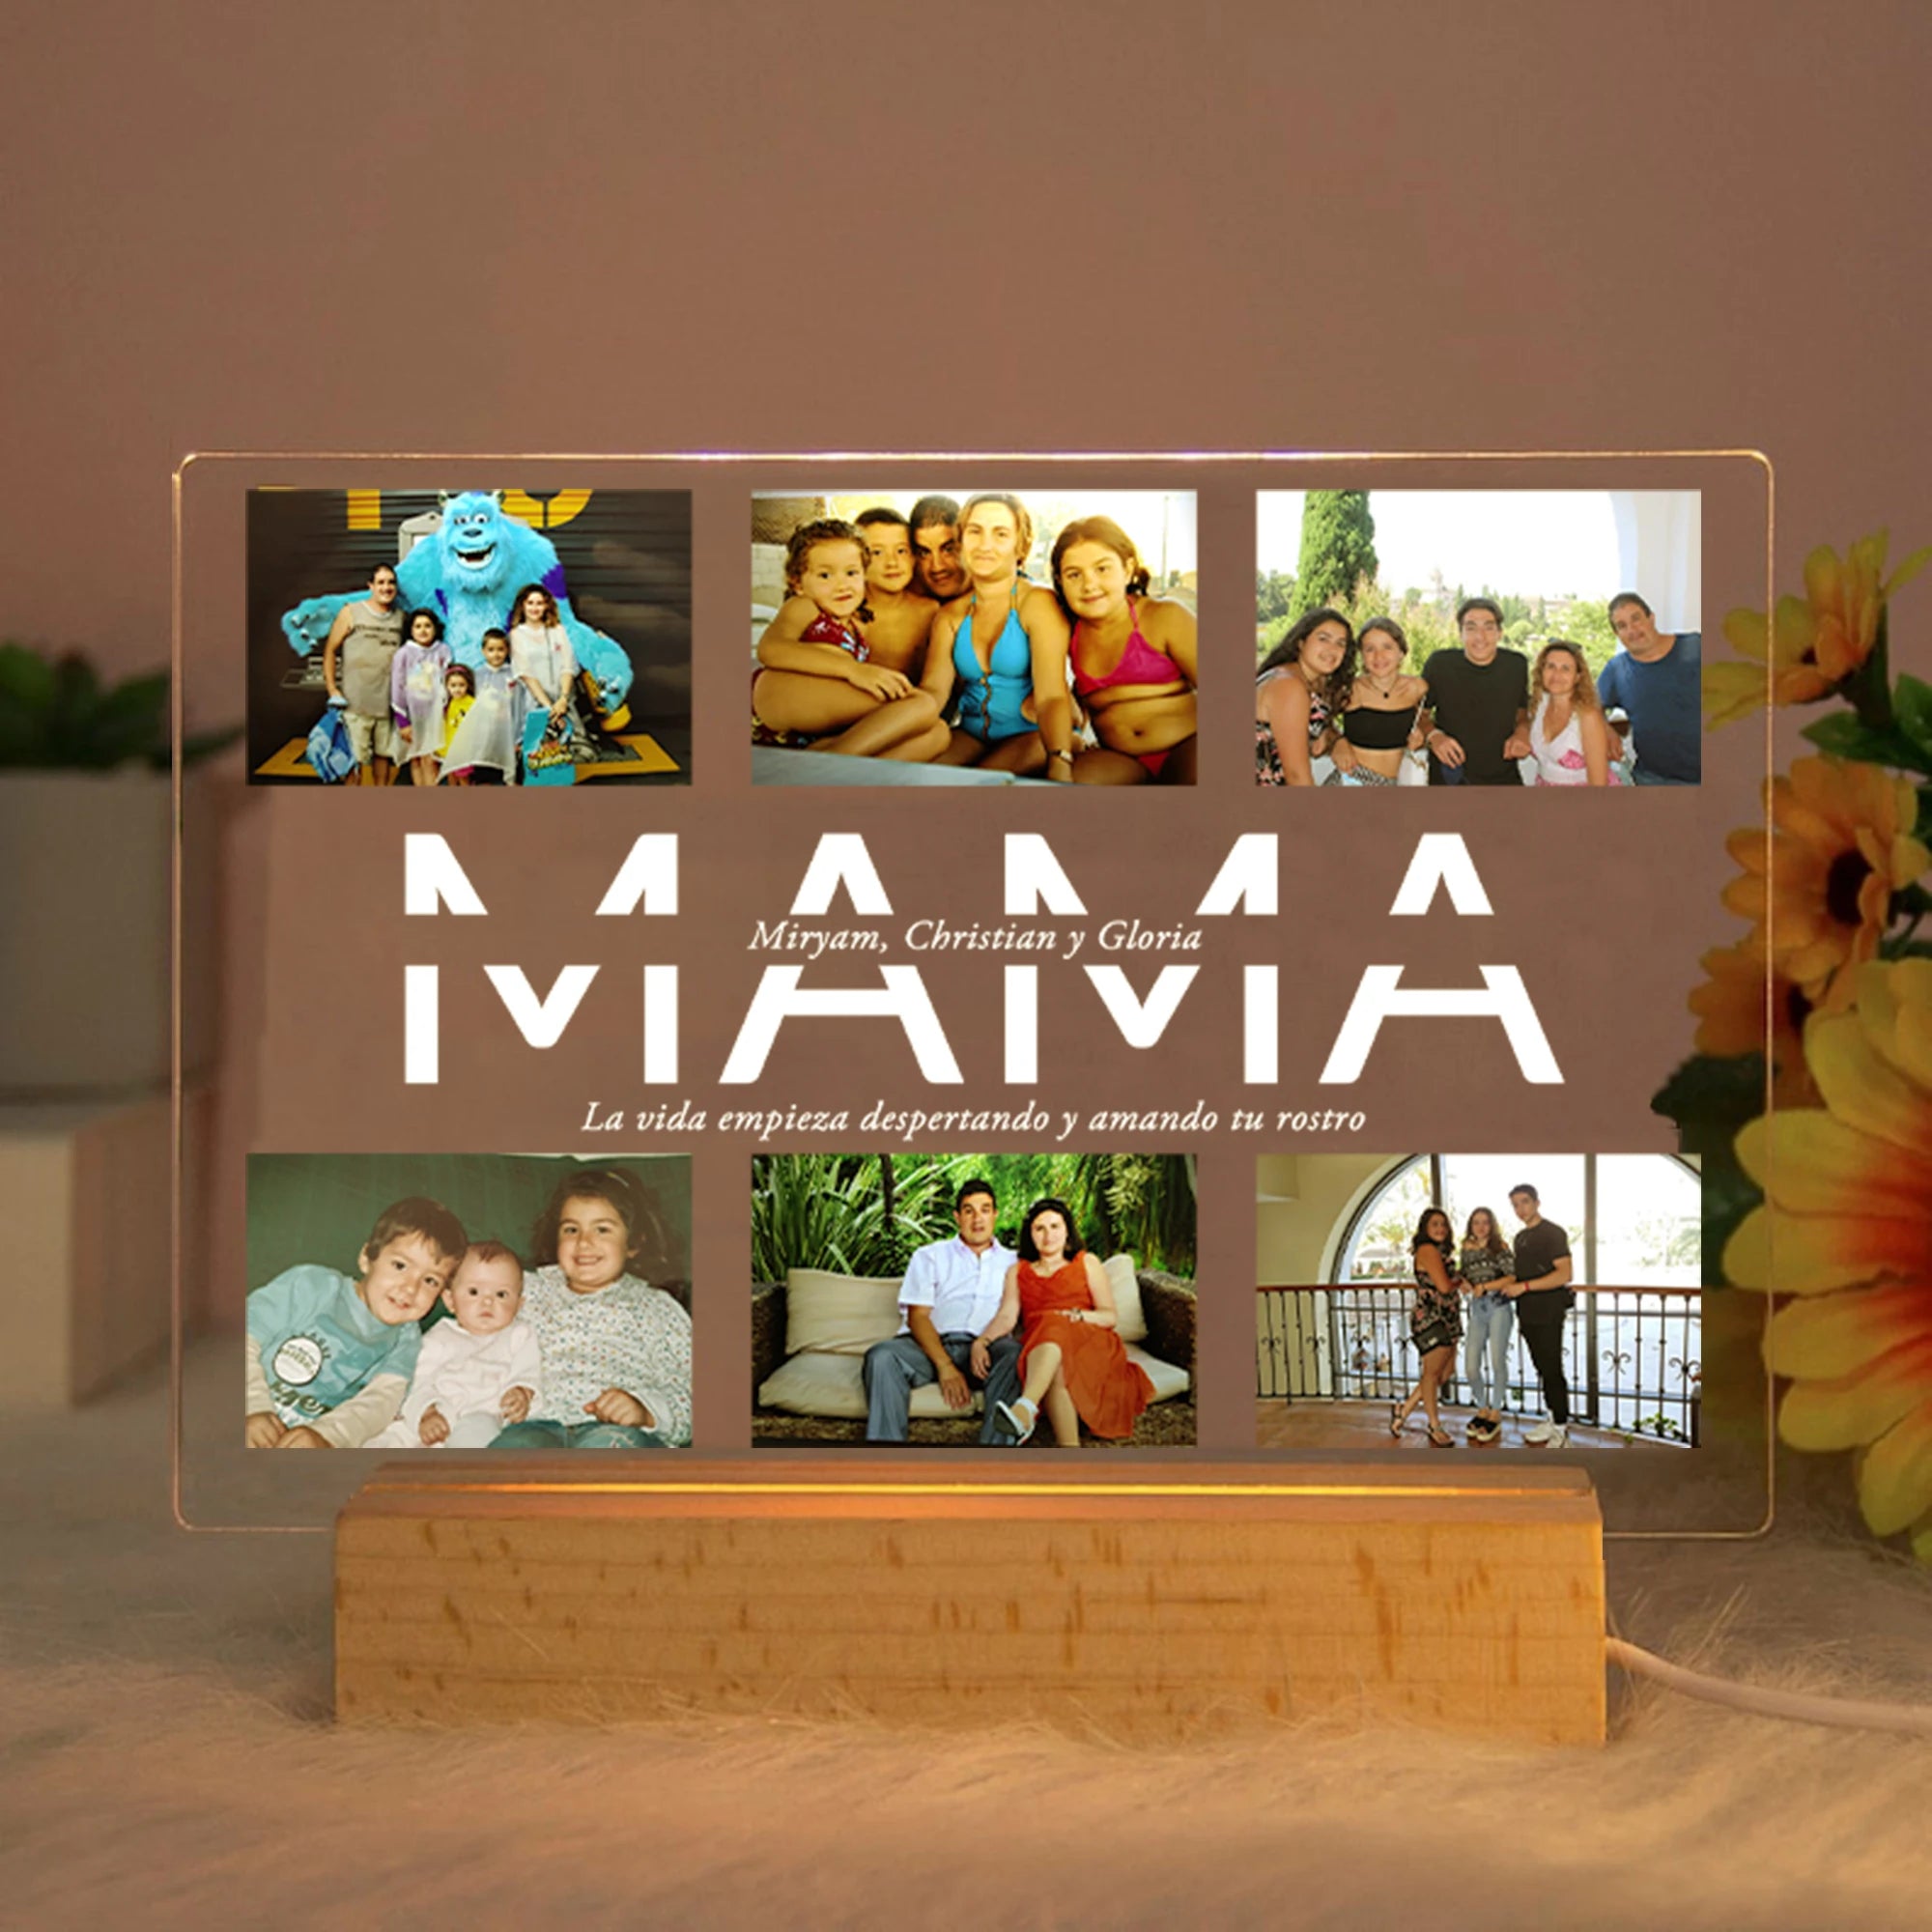 Personalized Acrylic Lamp with Custom Photo and Text - Ideal Bedroom Night Light for MOM DAD LOVE Friend Family Day Wedding Birthday Gift Present MAMA / Warm Light